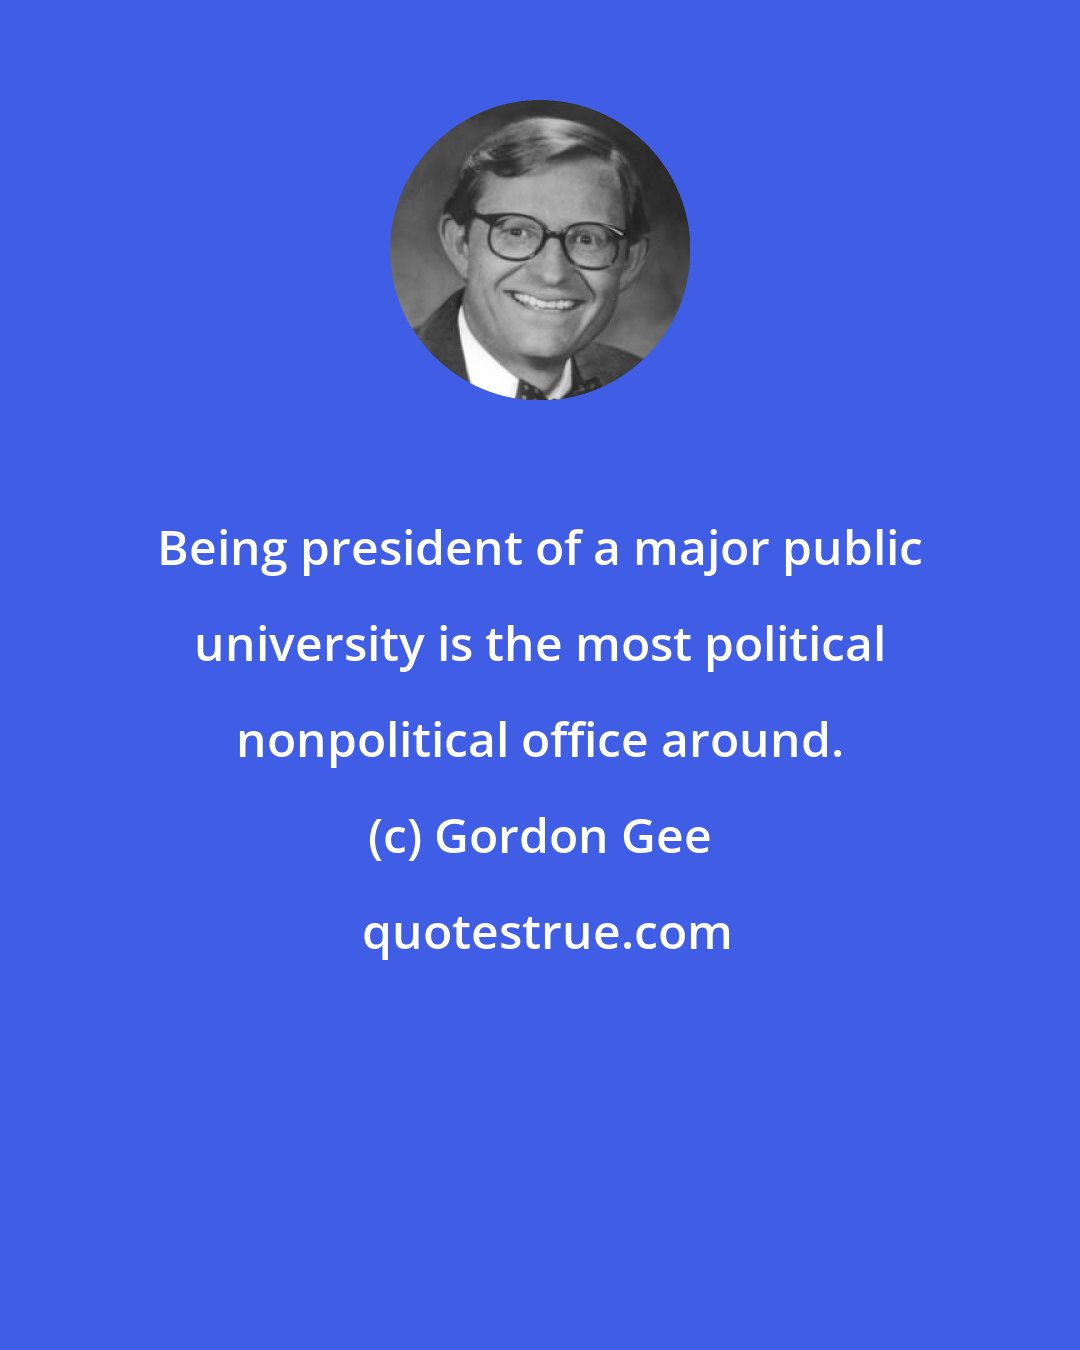 Gordon Gee: Being president of a major public university is the most political nonpolitical office around.